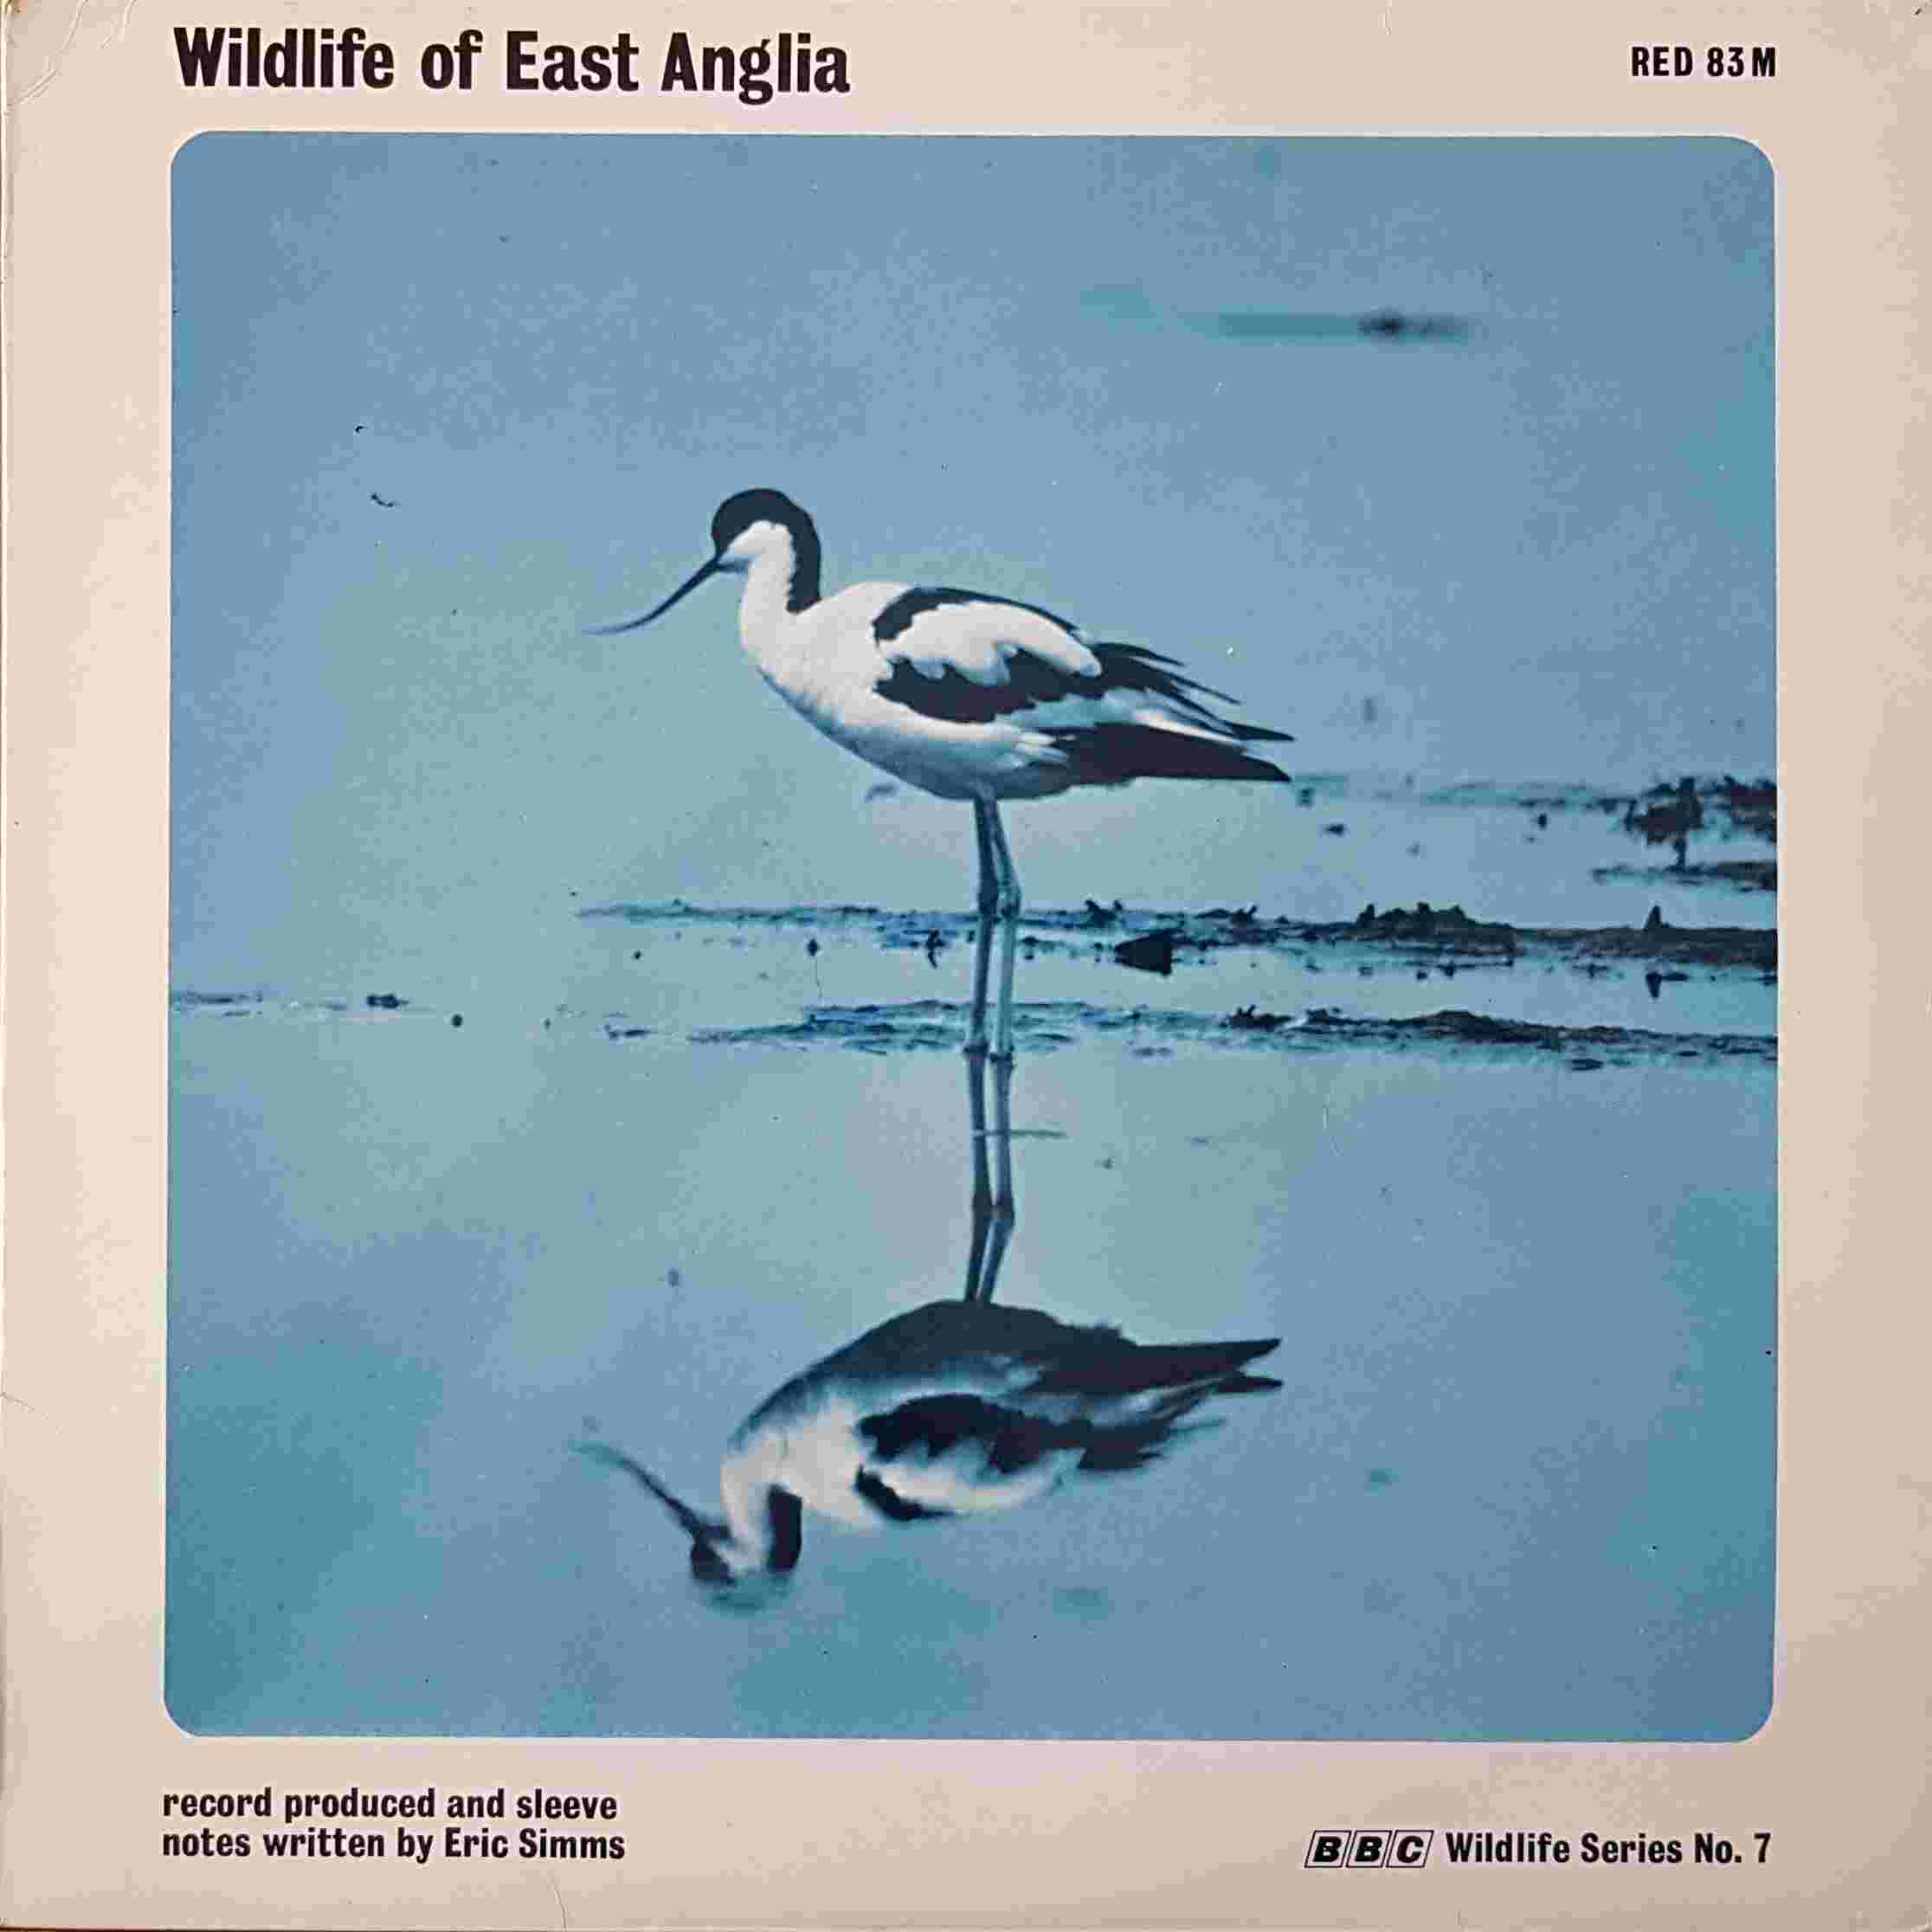 Picture of RED 83 Wildlife of East Anglia - BBC wildlife series no. 7 by artist Various from the BBC albums - Records and Tapes library